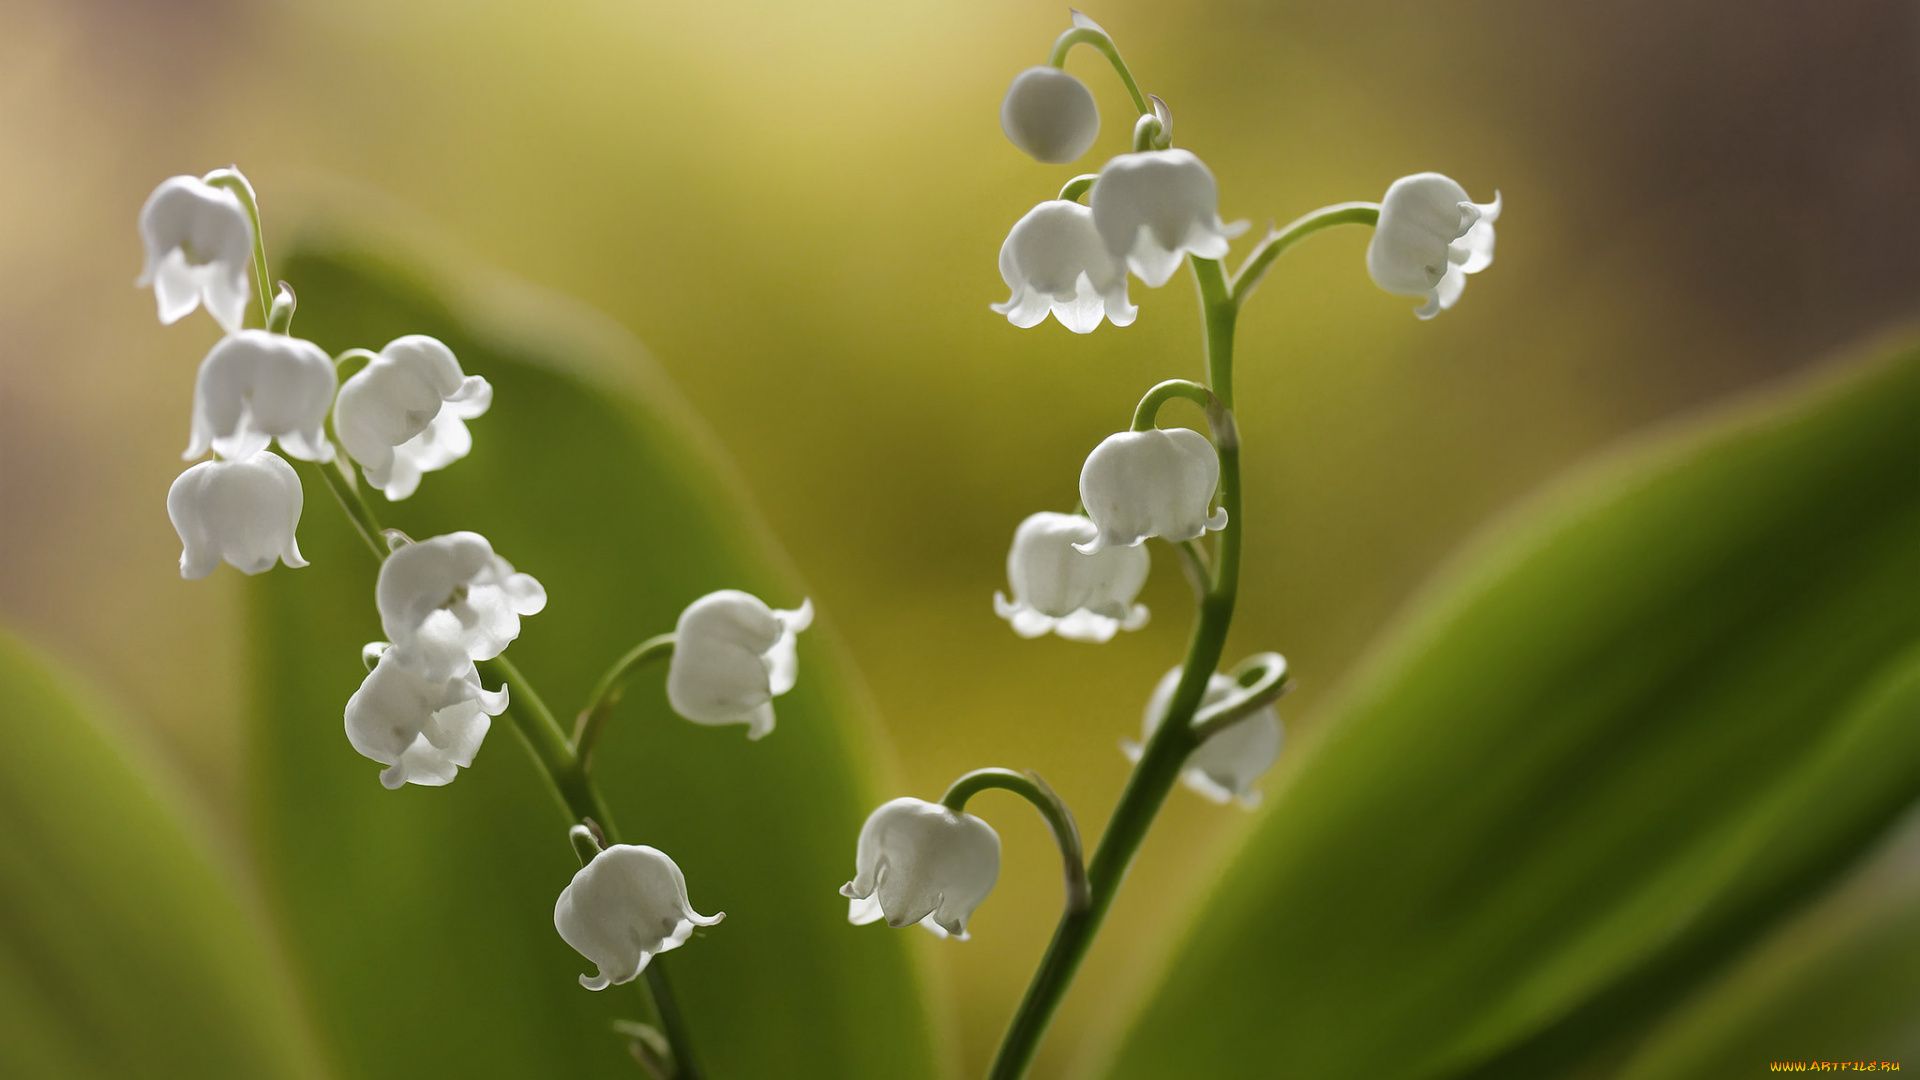 Lily Of The Valley hd wallpaper for laptop